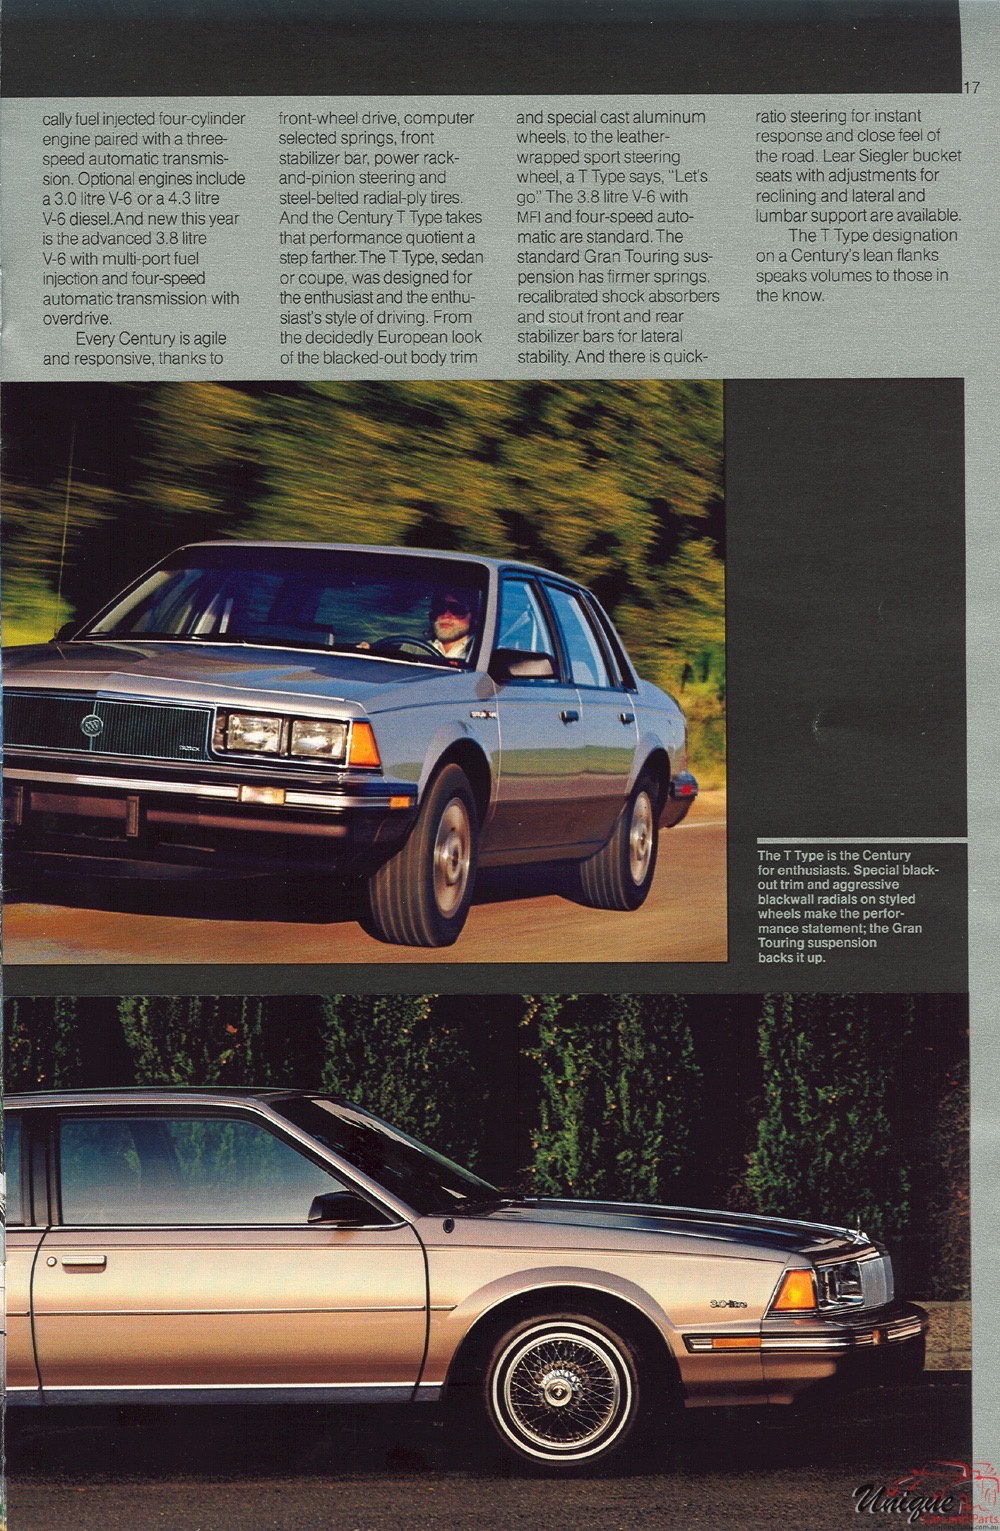 1985 Buick Art Book Page 2